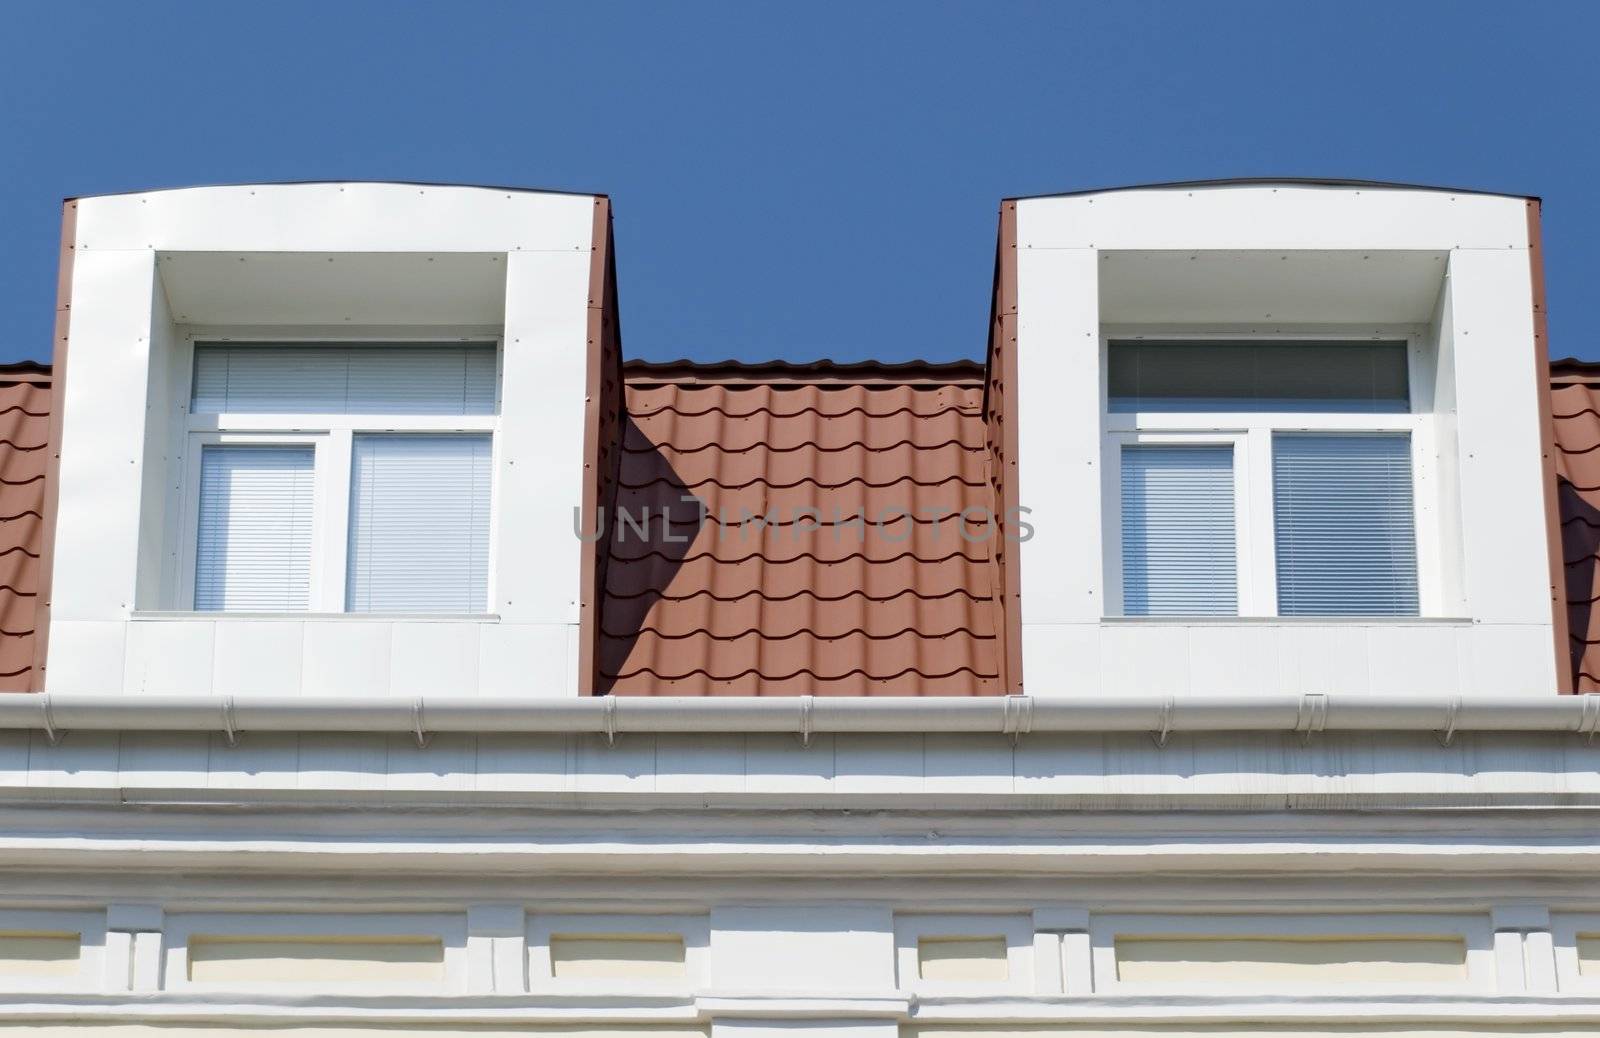 Two windows. A facade of a modern building with a tile roof